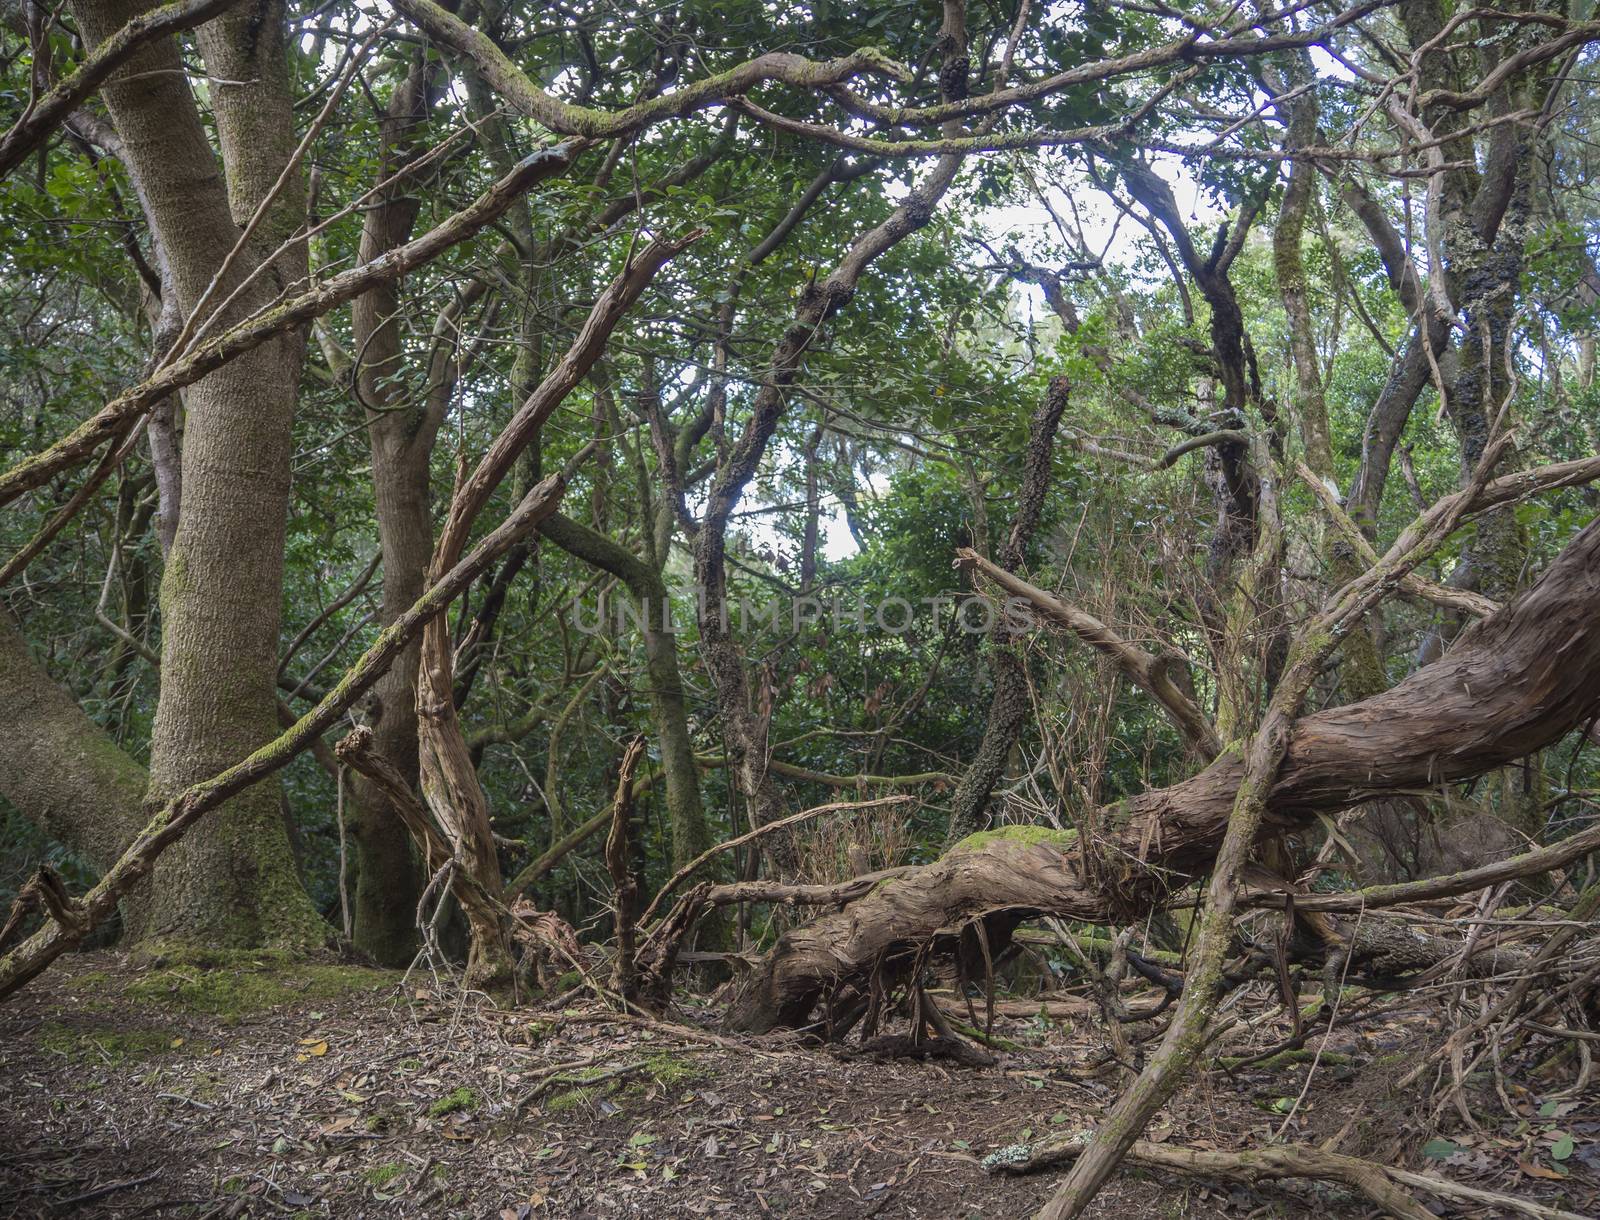 mystery primary Laurel forest Laurisilva rainforest with old mossed trees twisted roots in anaga mountain, tenerife canary island spain, natural background